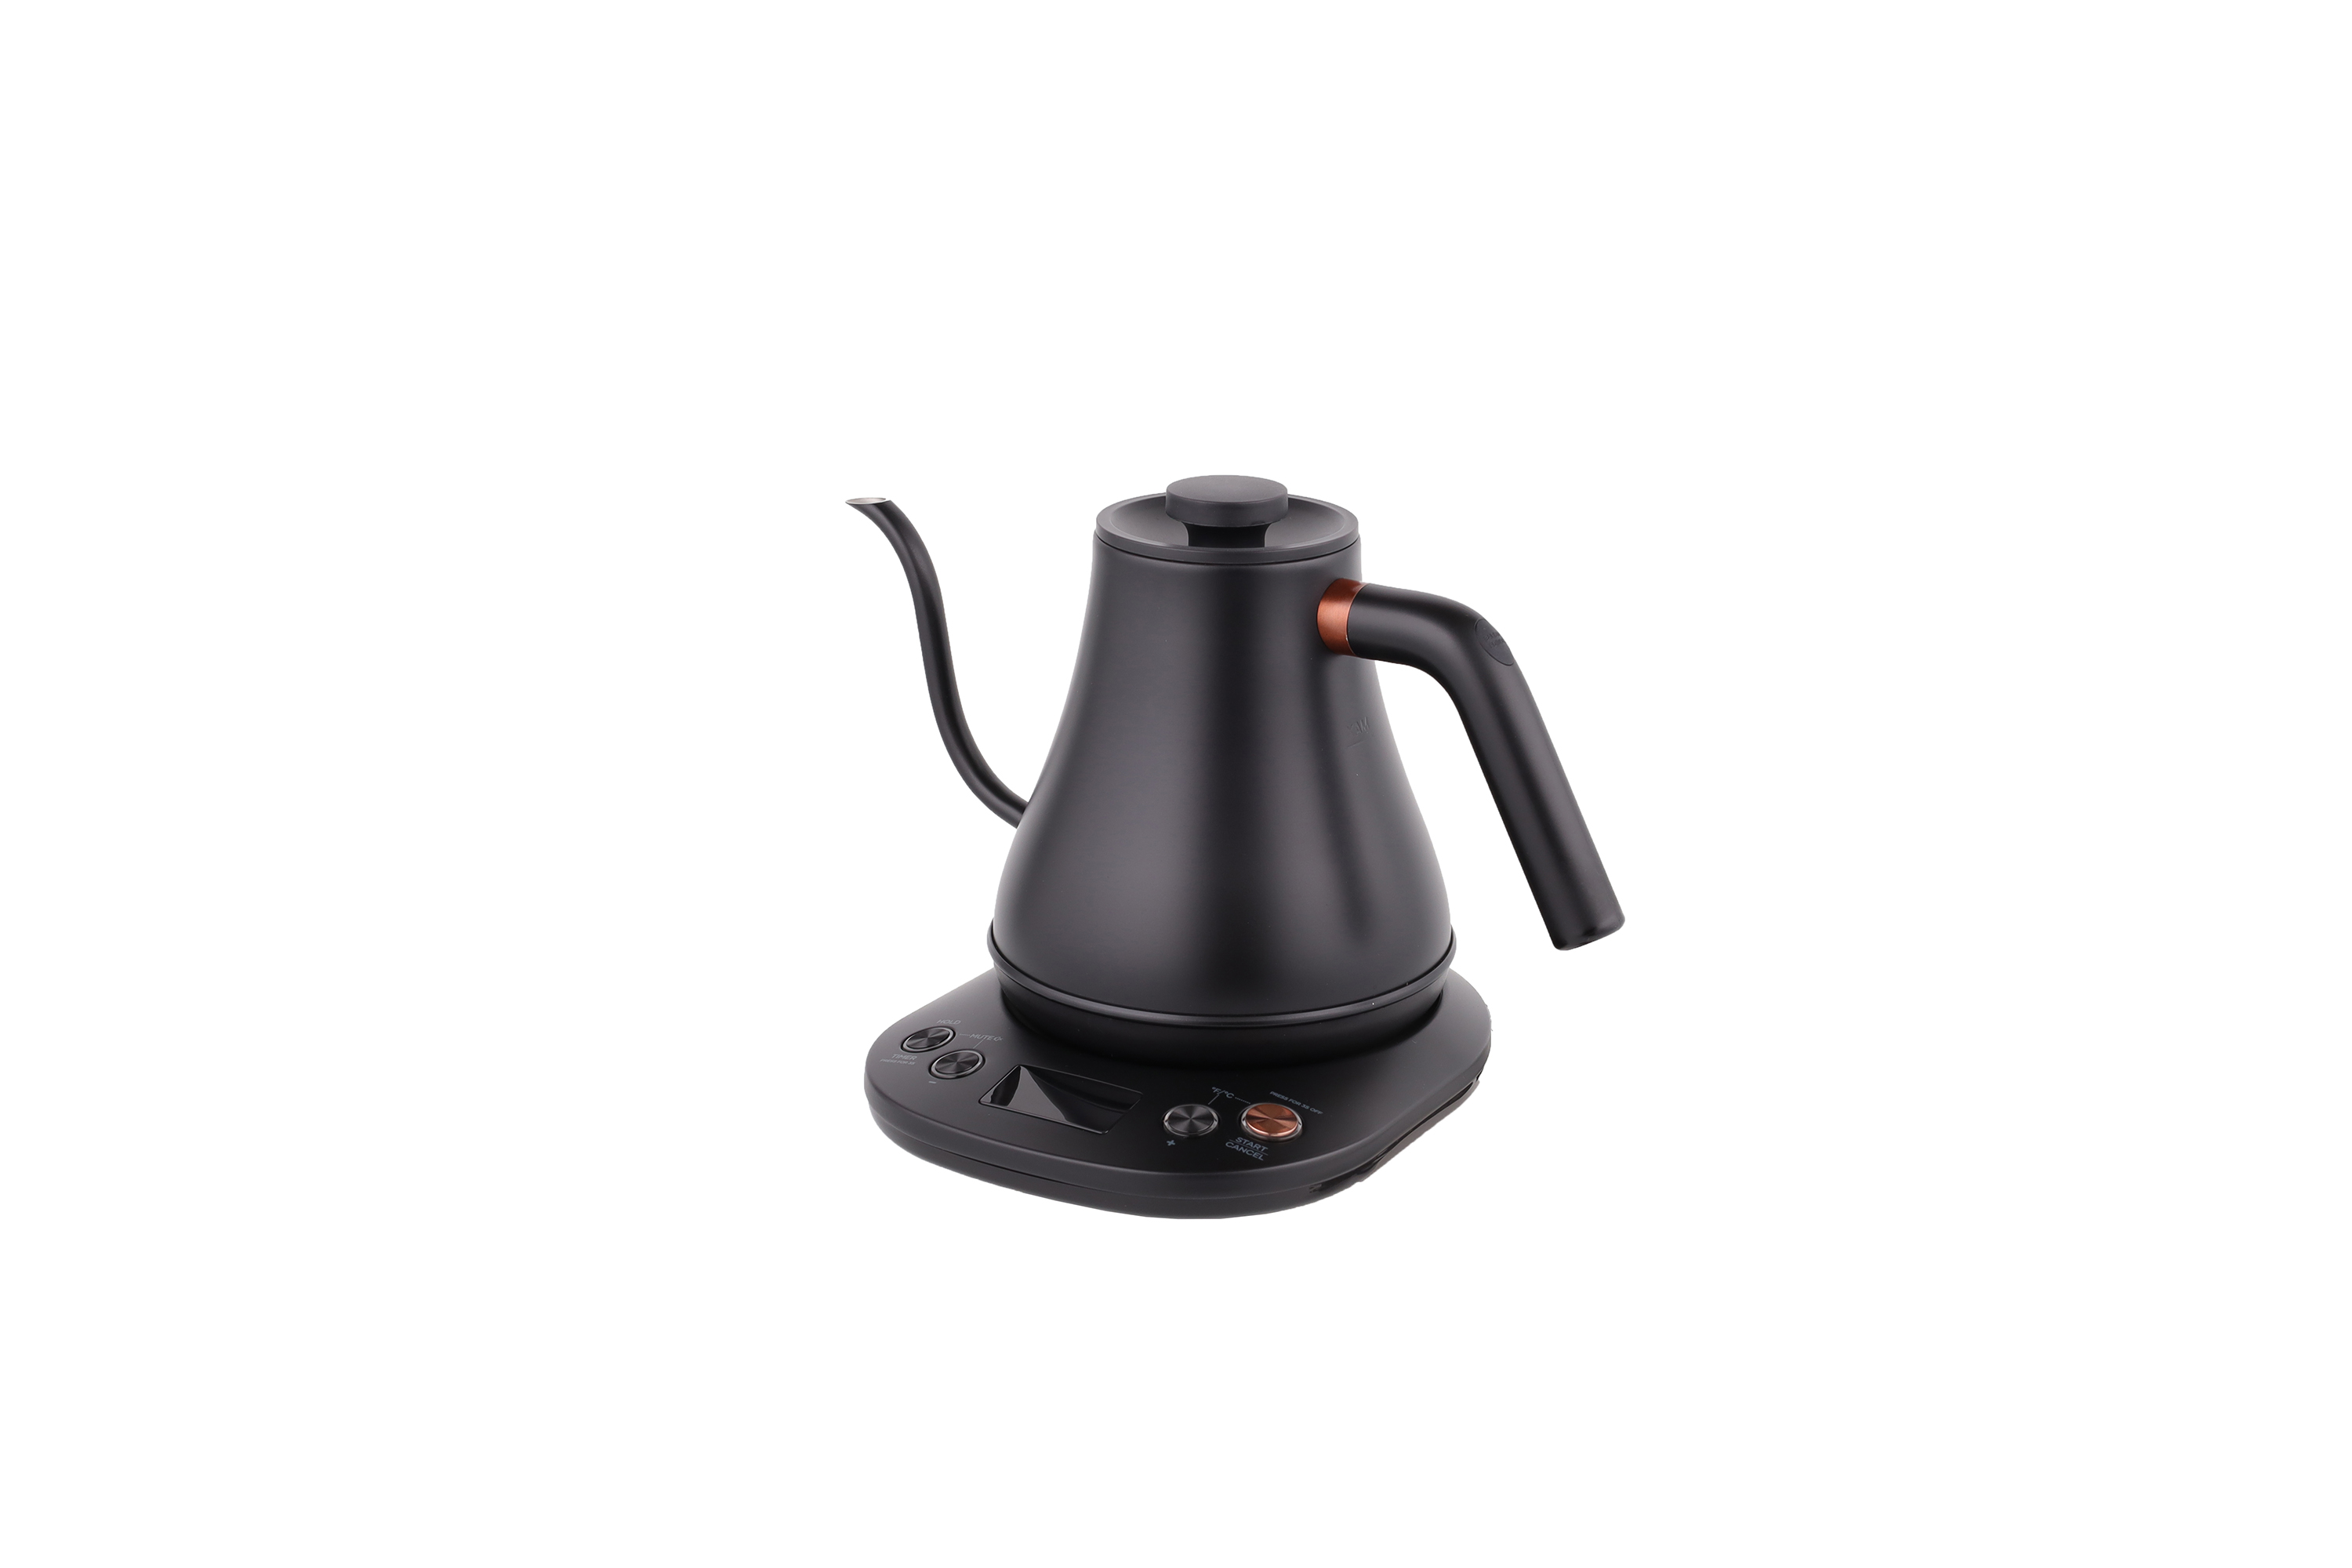 REVIEW Mecity Electric Gooseneck Kettle With LCD Display